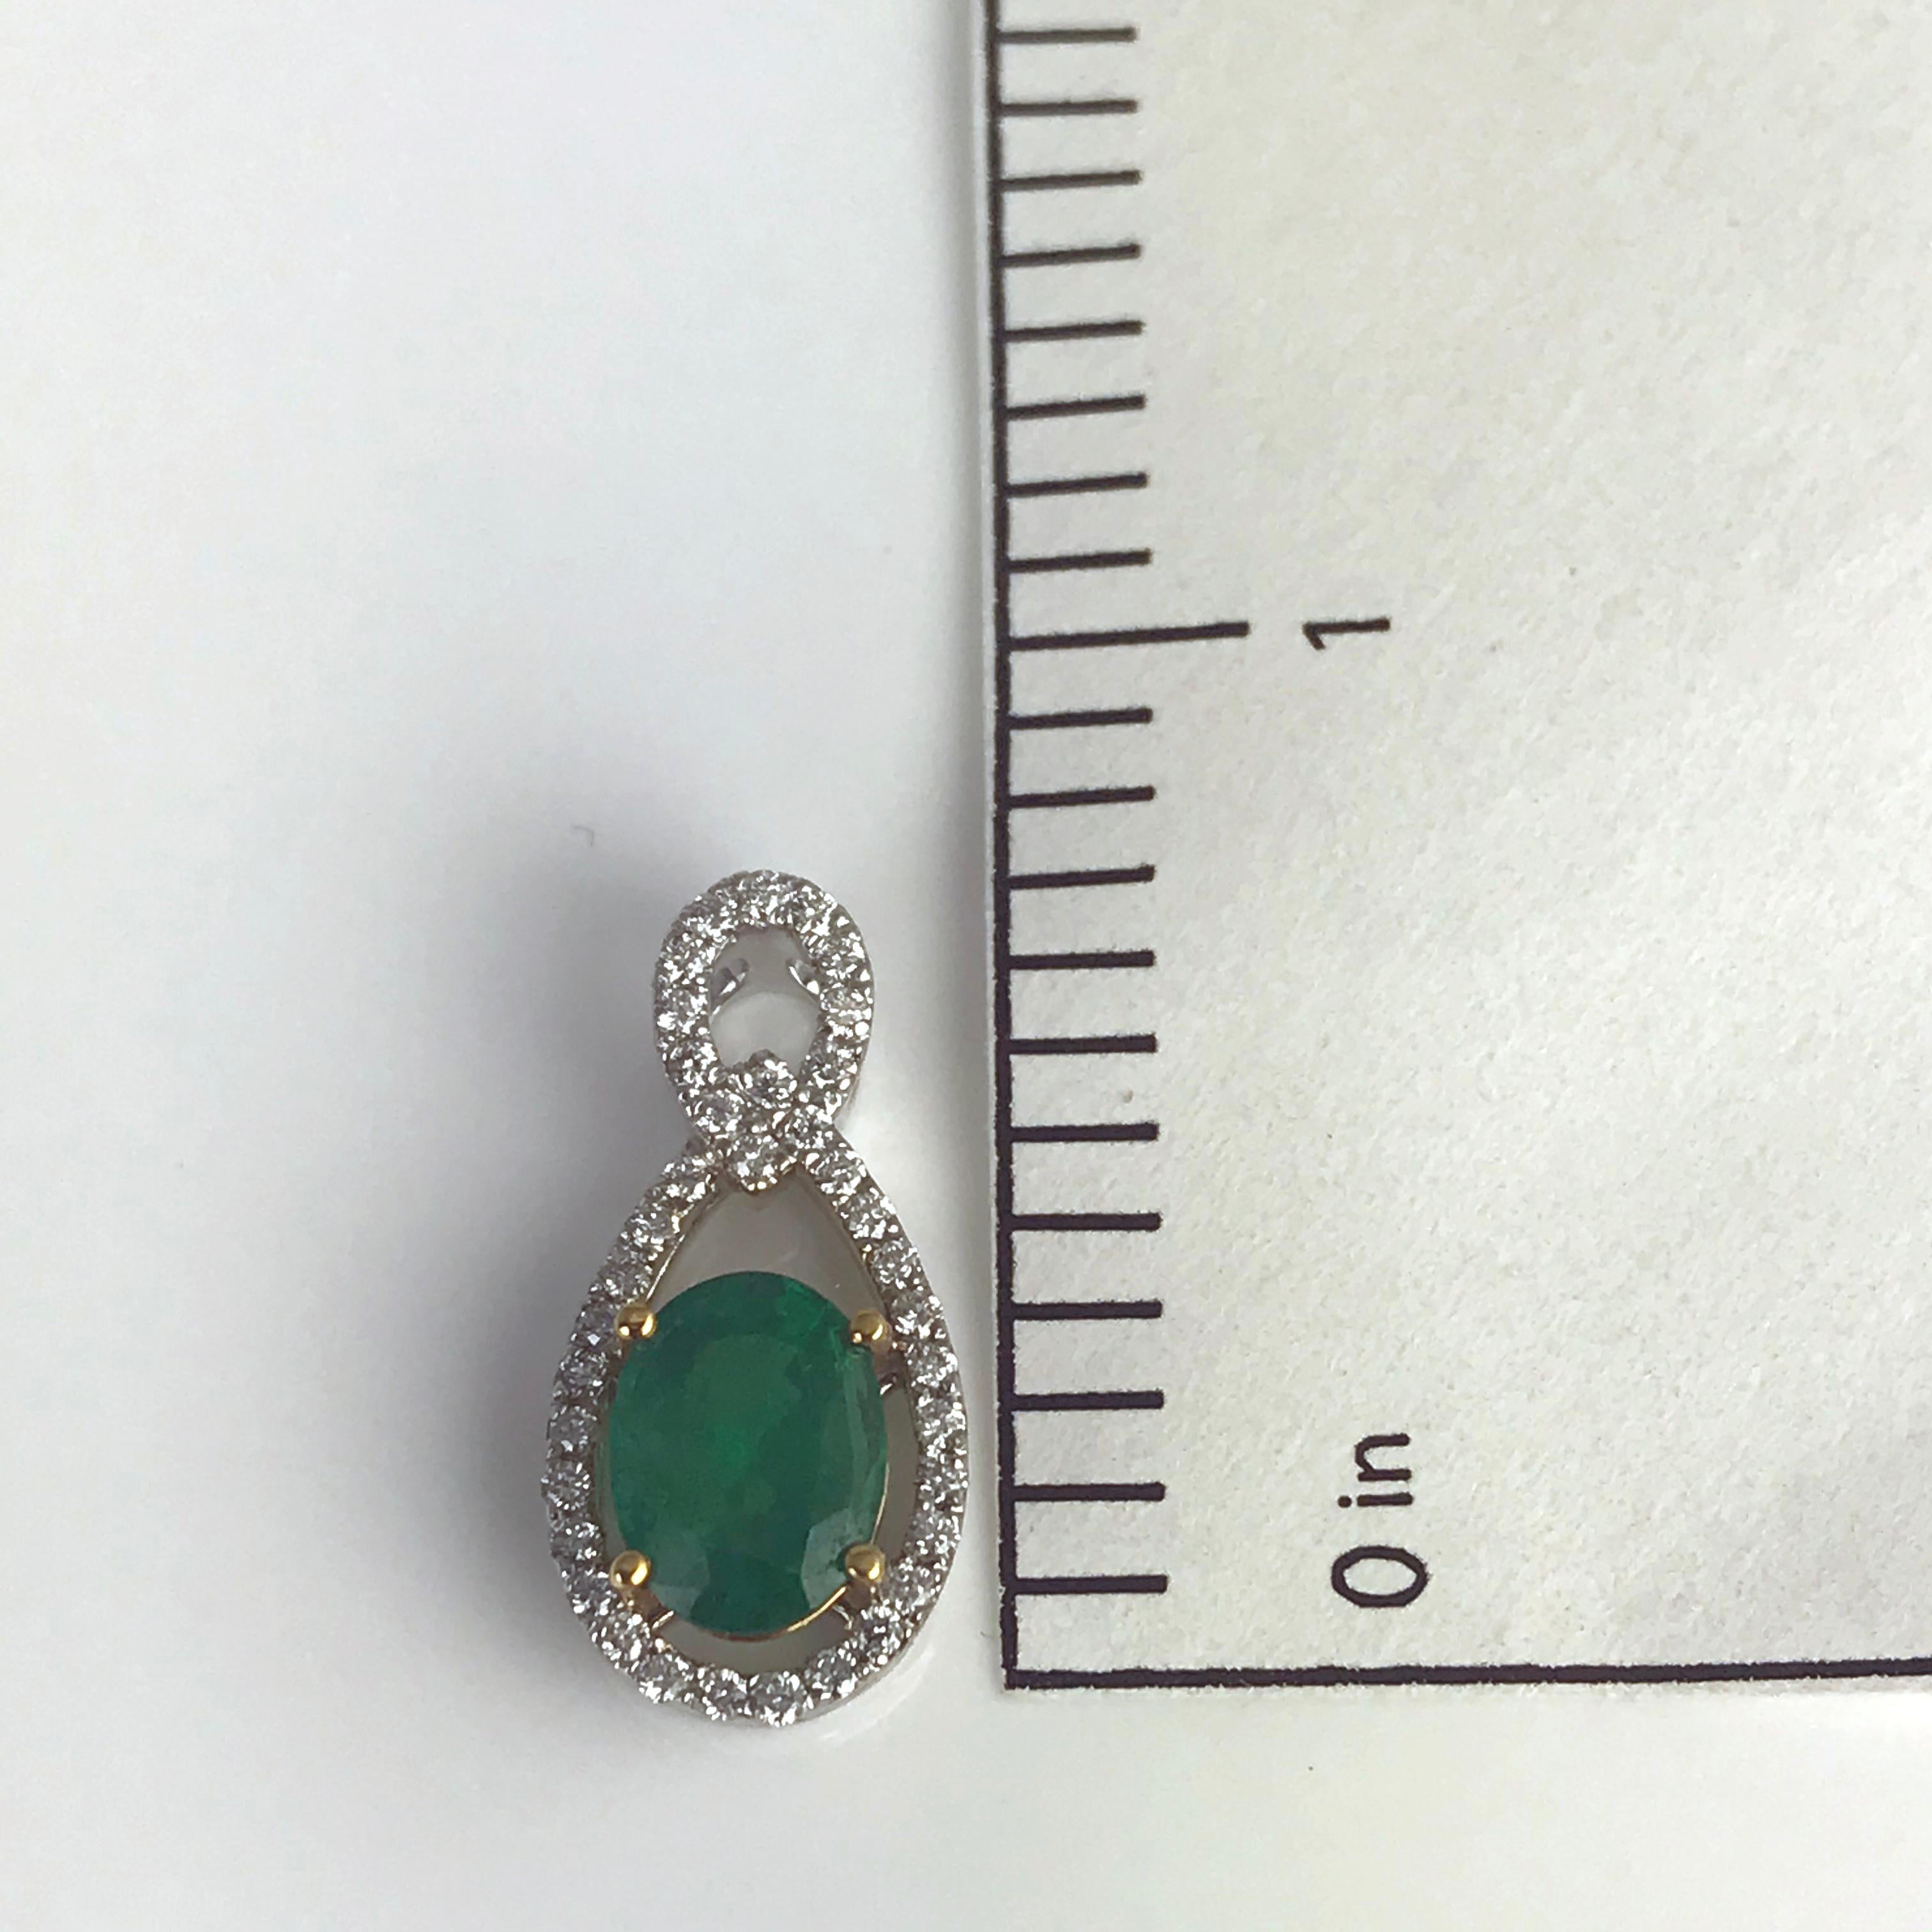 Contemporary 1.26 Carat Oval Cut Emerald and 0.22 Ct Natural Diamond Pendant in 18k ref1986 For Sale